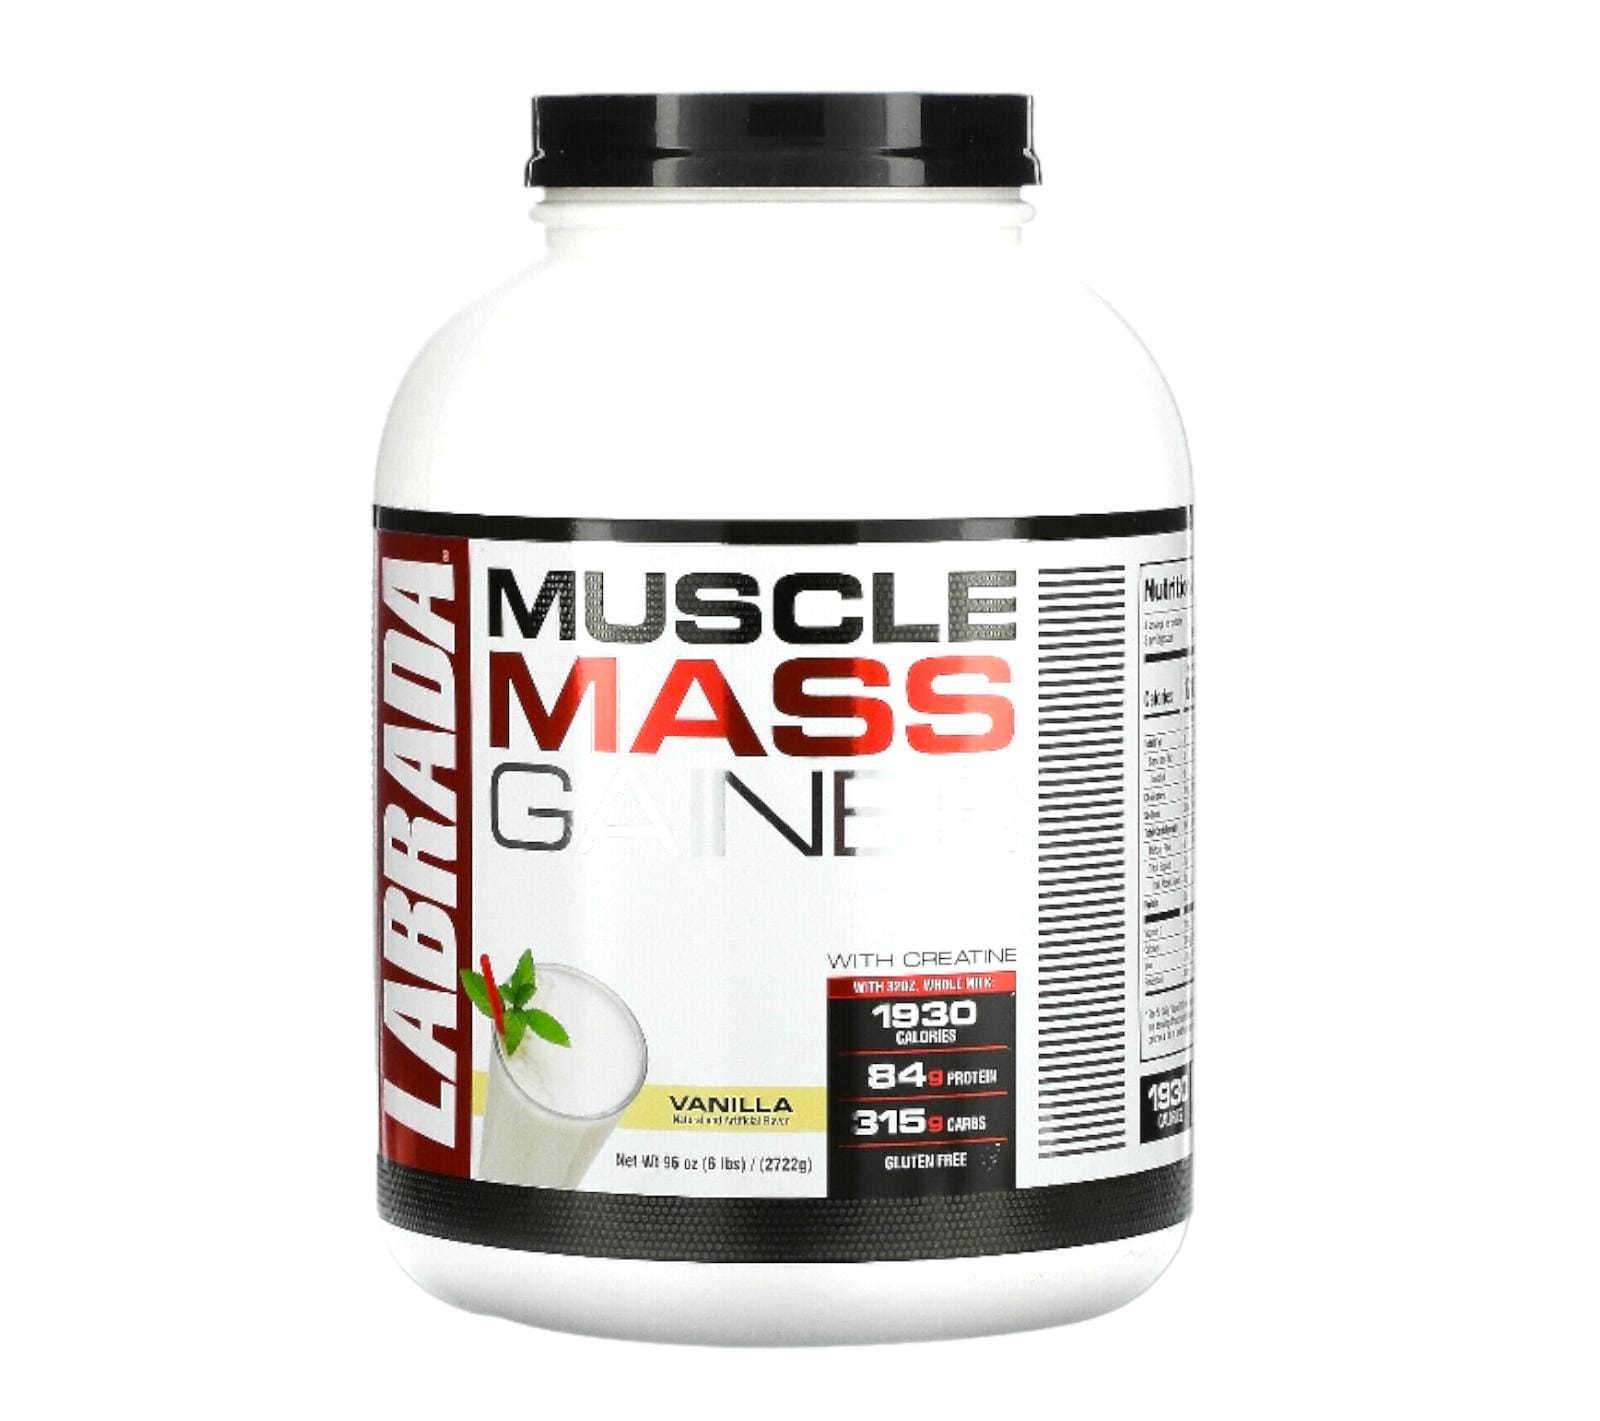 Muscle mass gainer